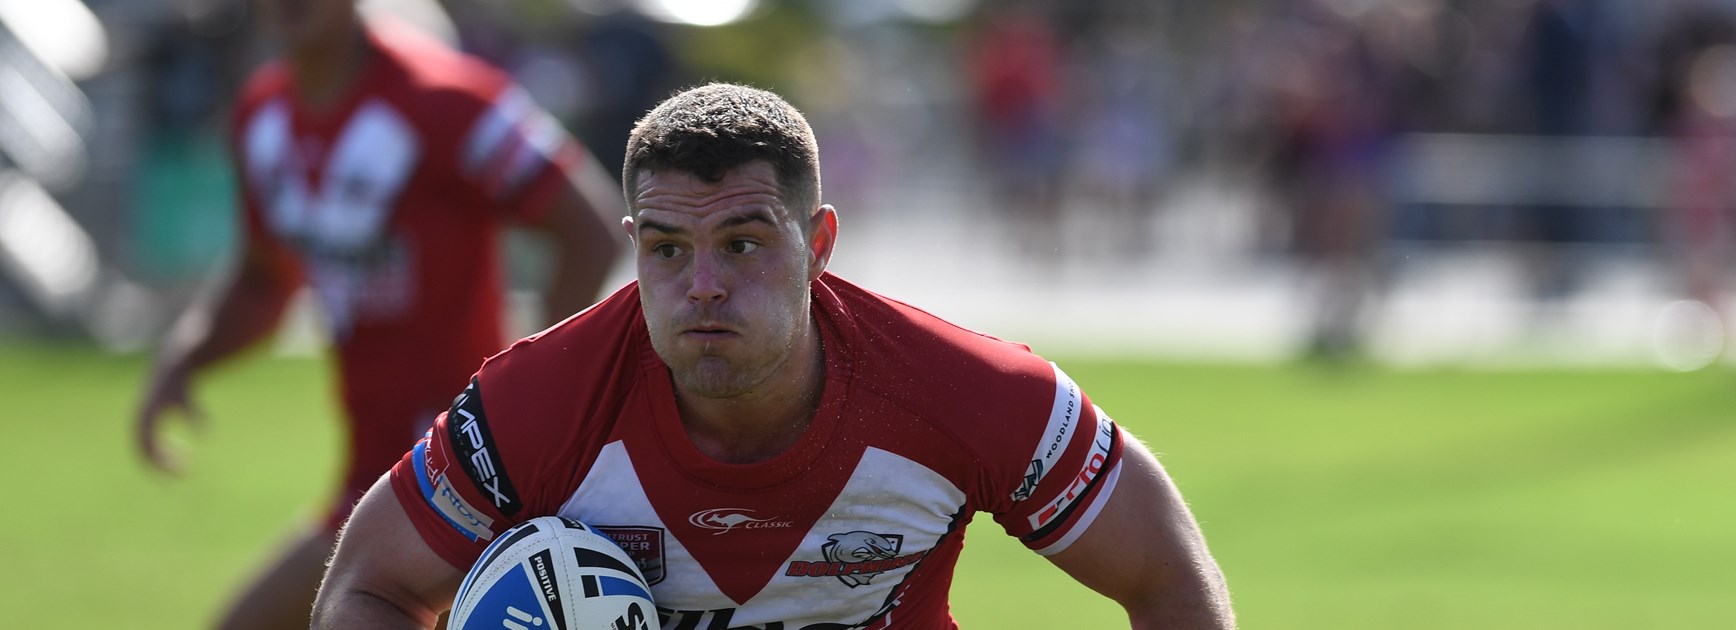 Beehag gets hat-trick in Dolphins win over Cutters